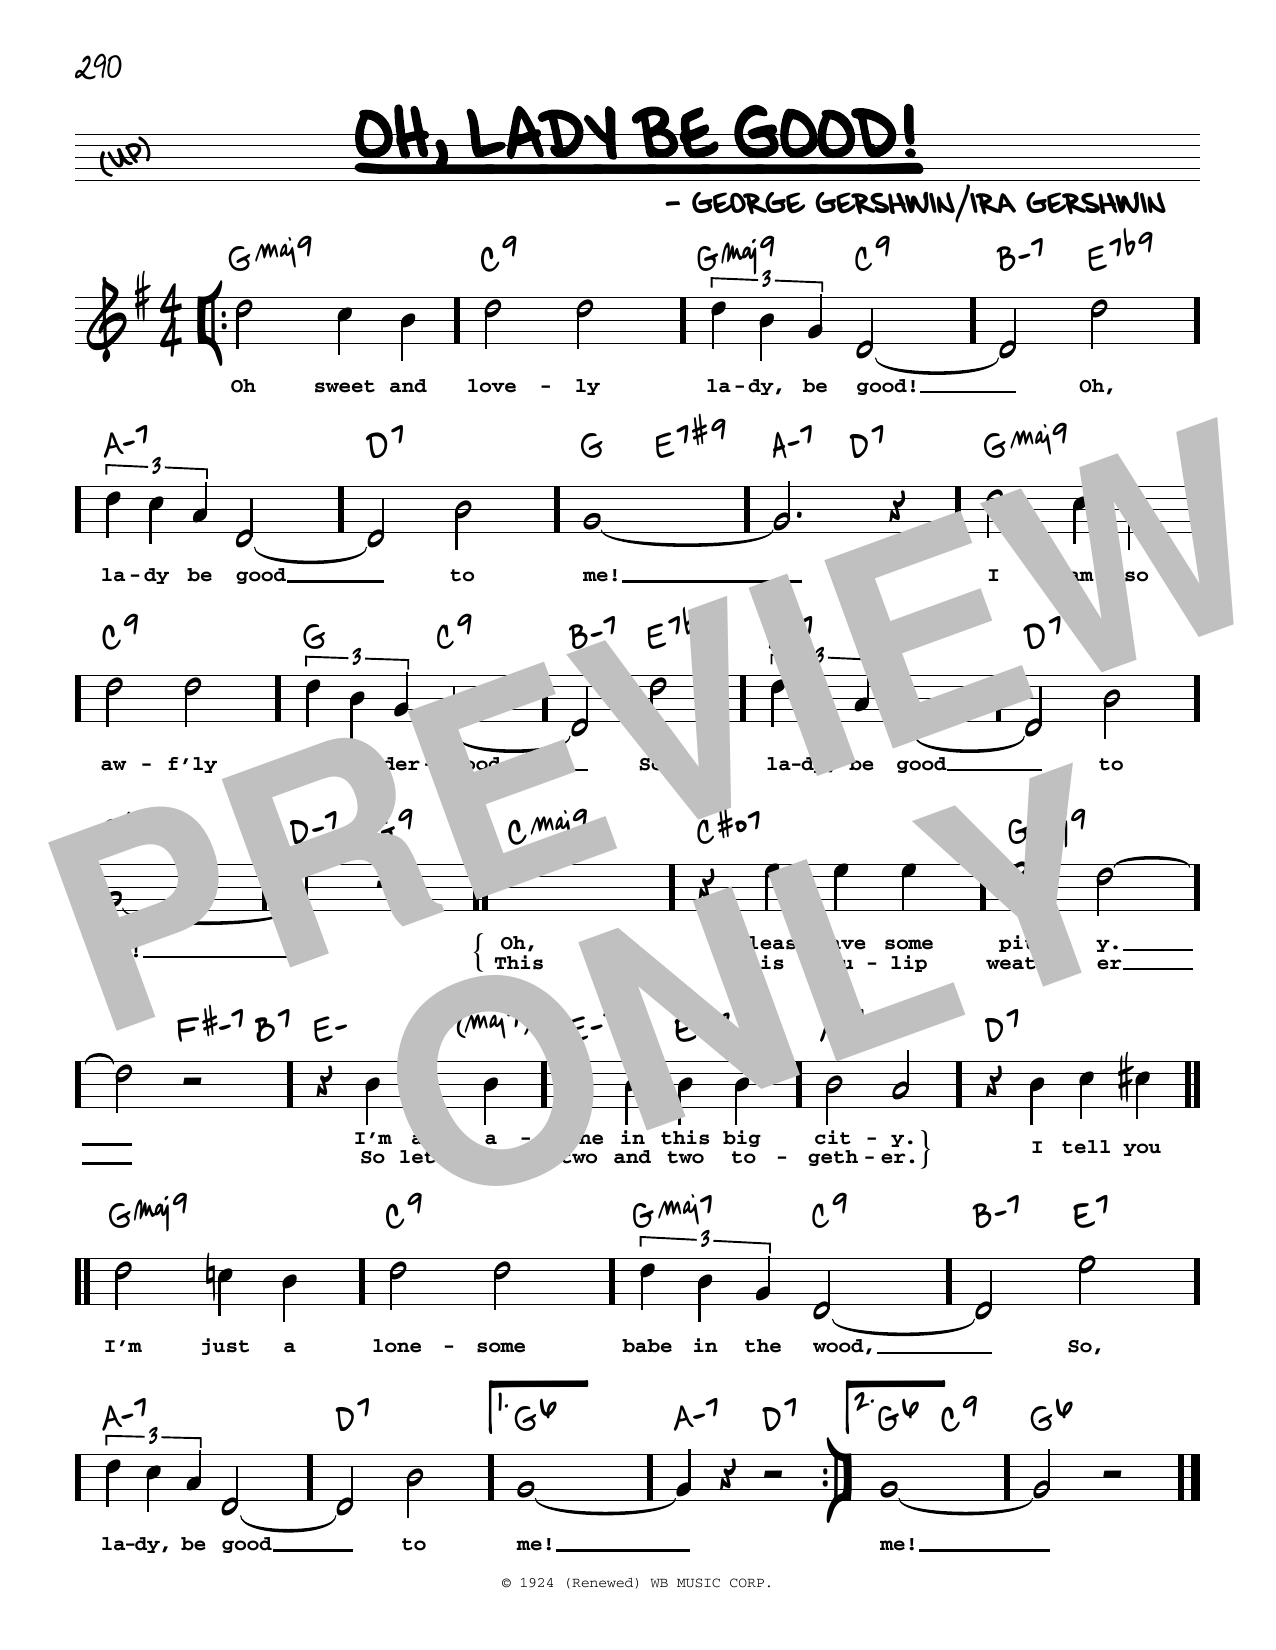 Download George Gershwin & Ira Gershwin Oh, Lady Be Good! (High Voice) (from La Sheet Music